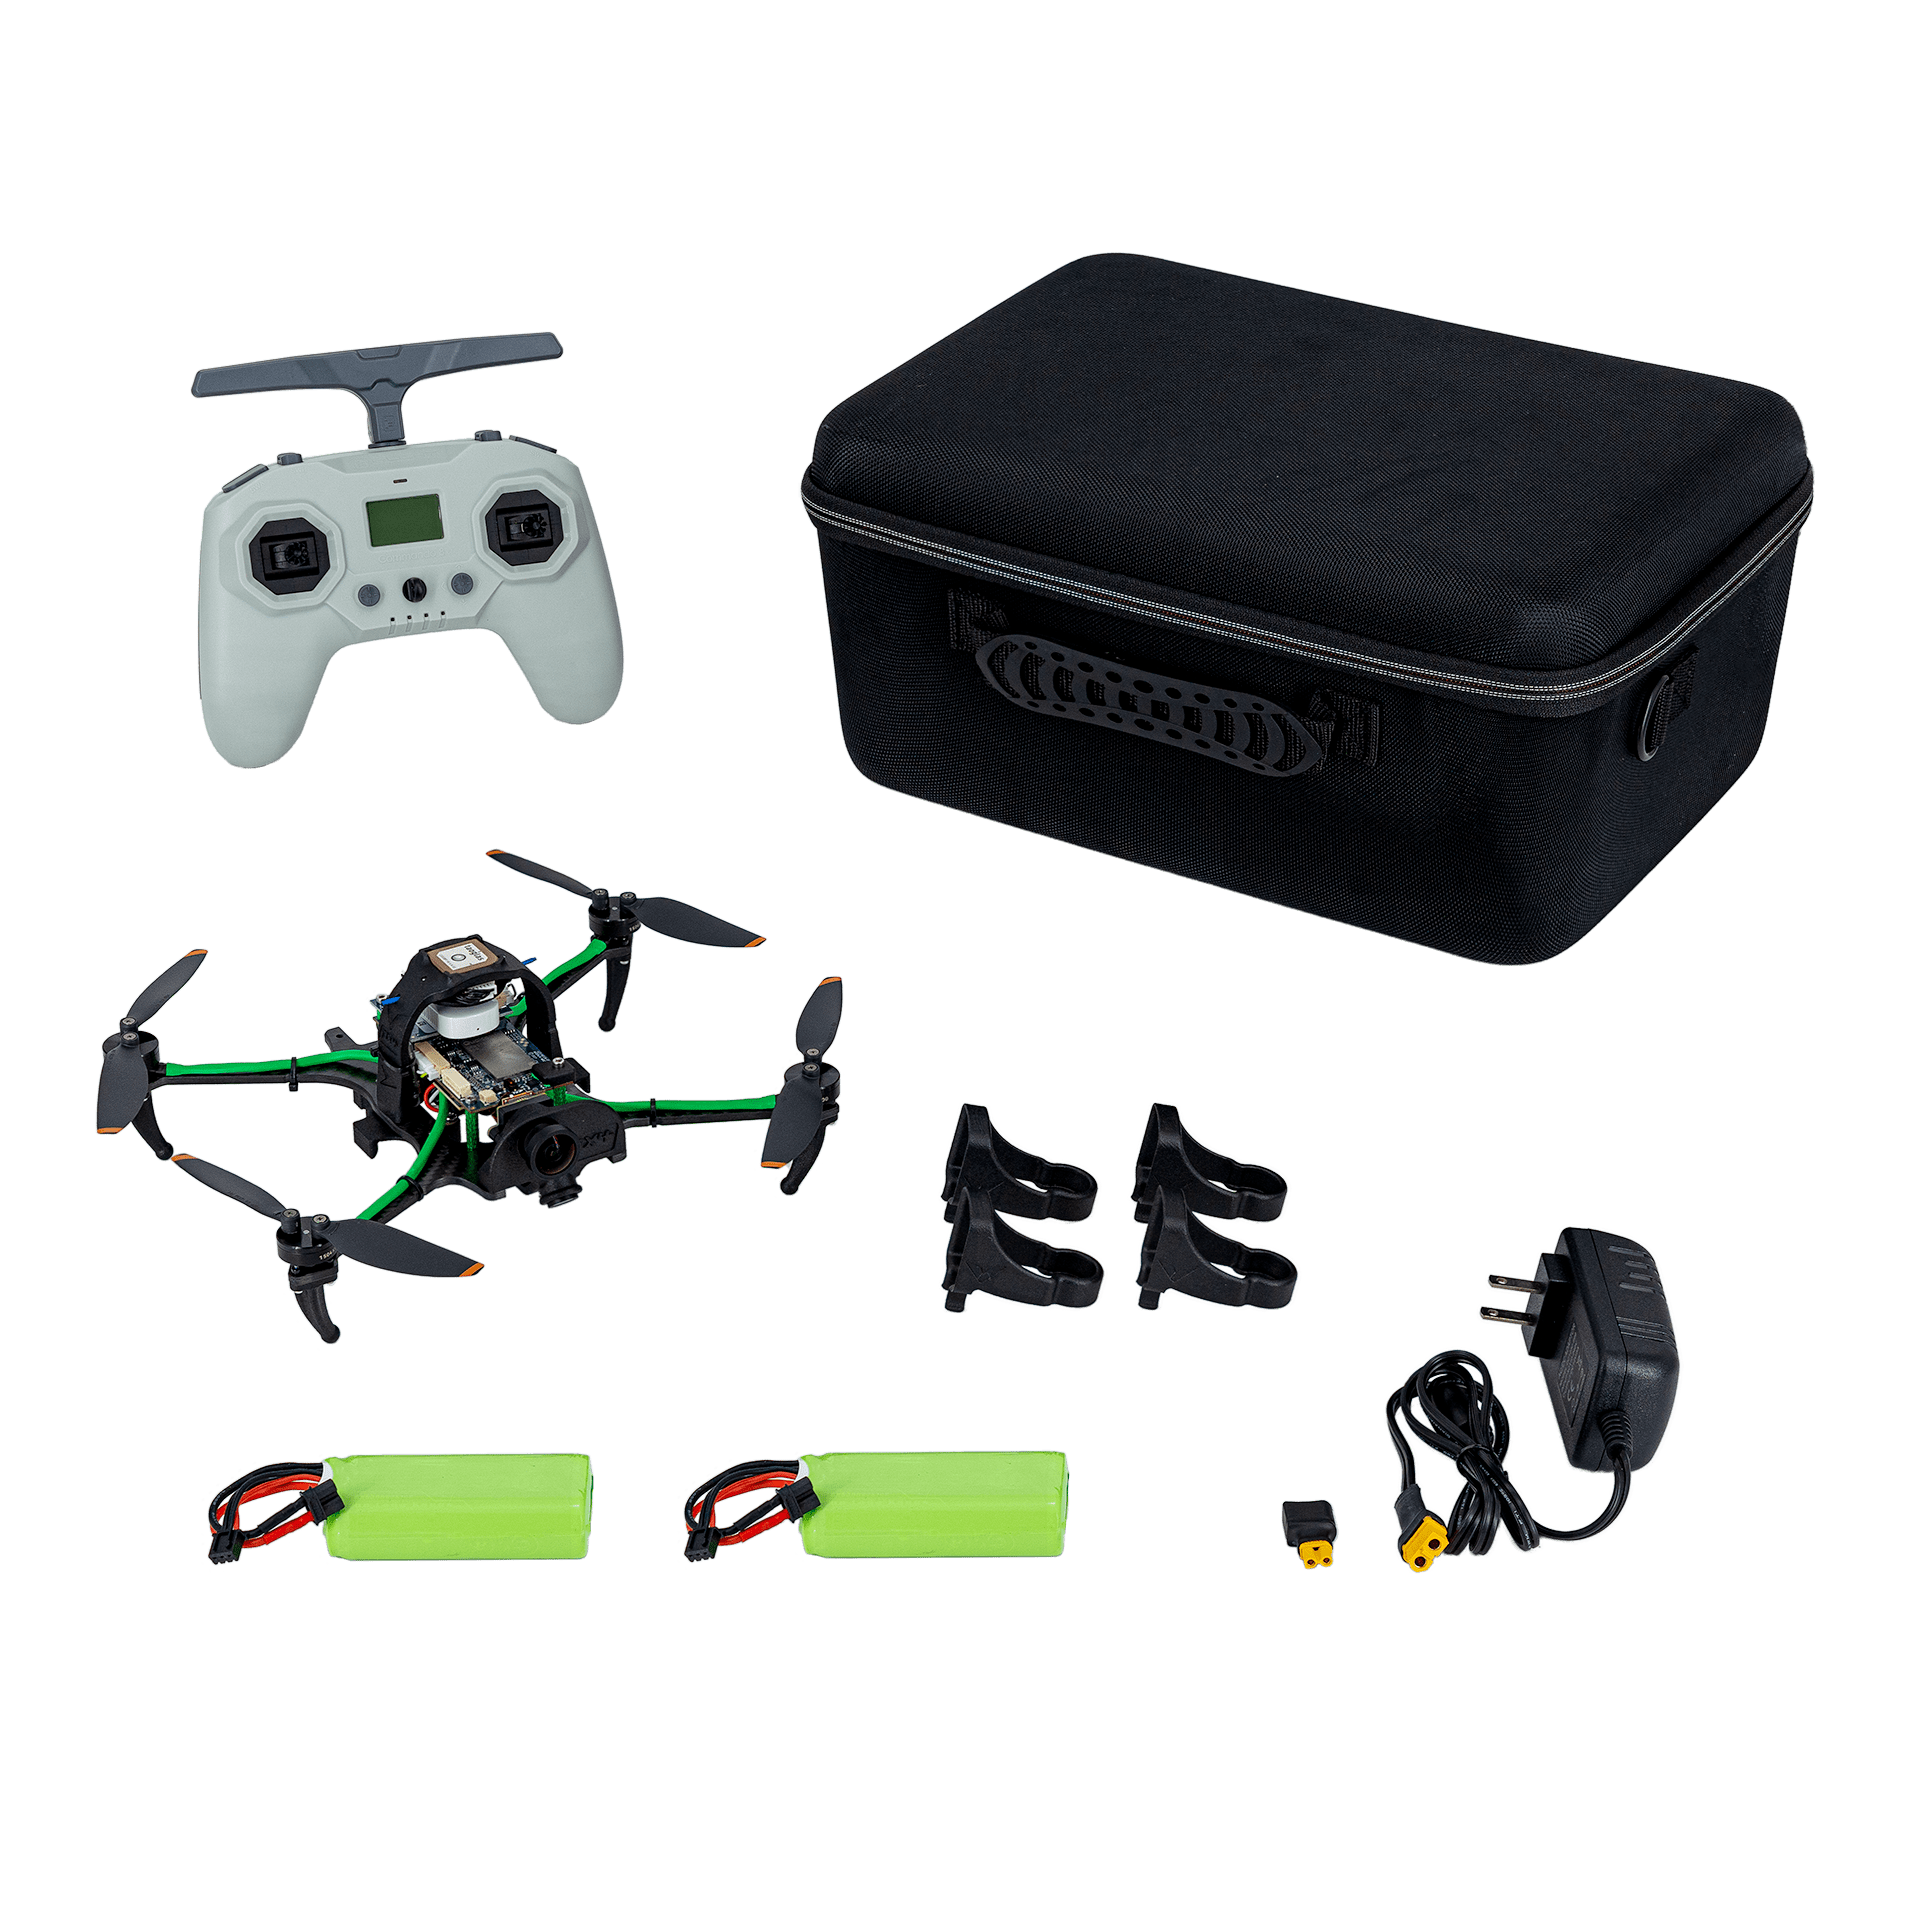 ModalAI, Inc. Drone with Batteries, Controller and Case PX4 Autonomy Developer Kit